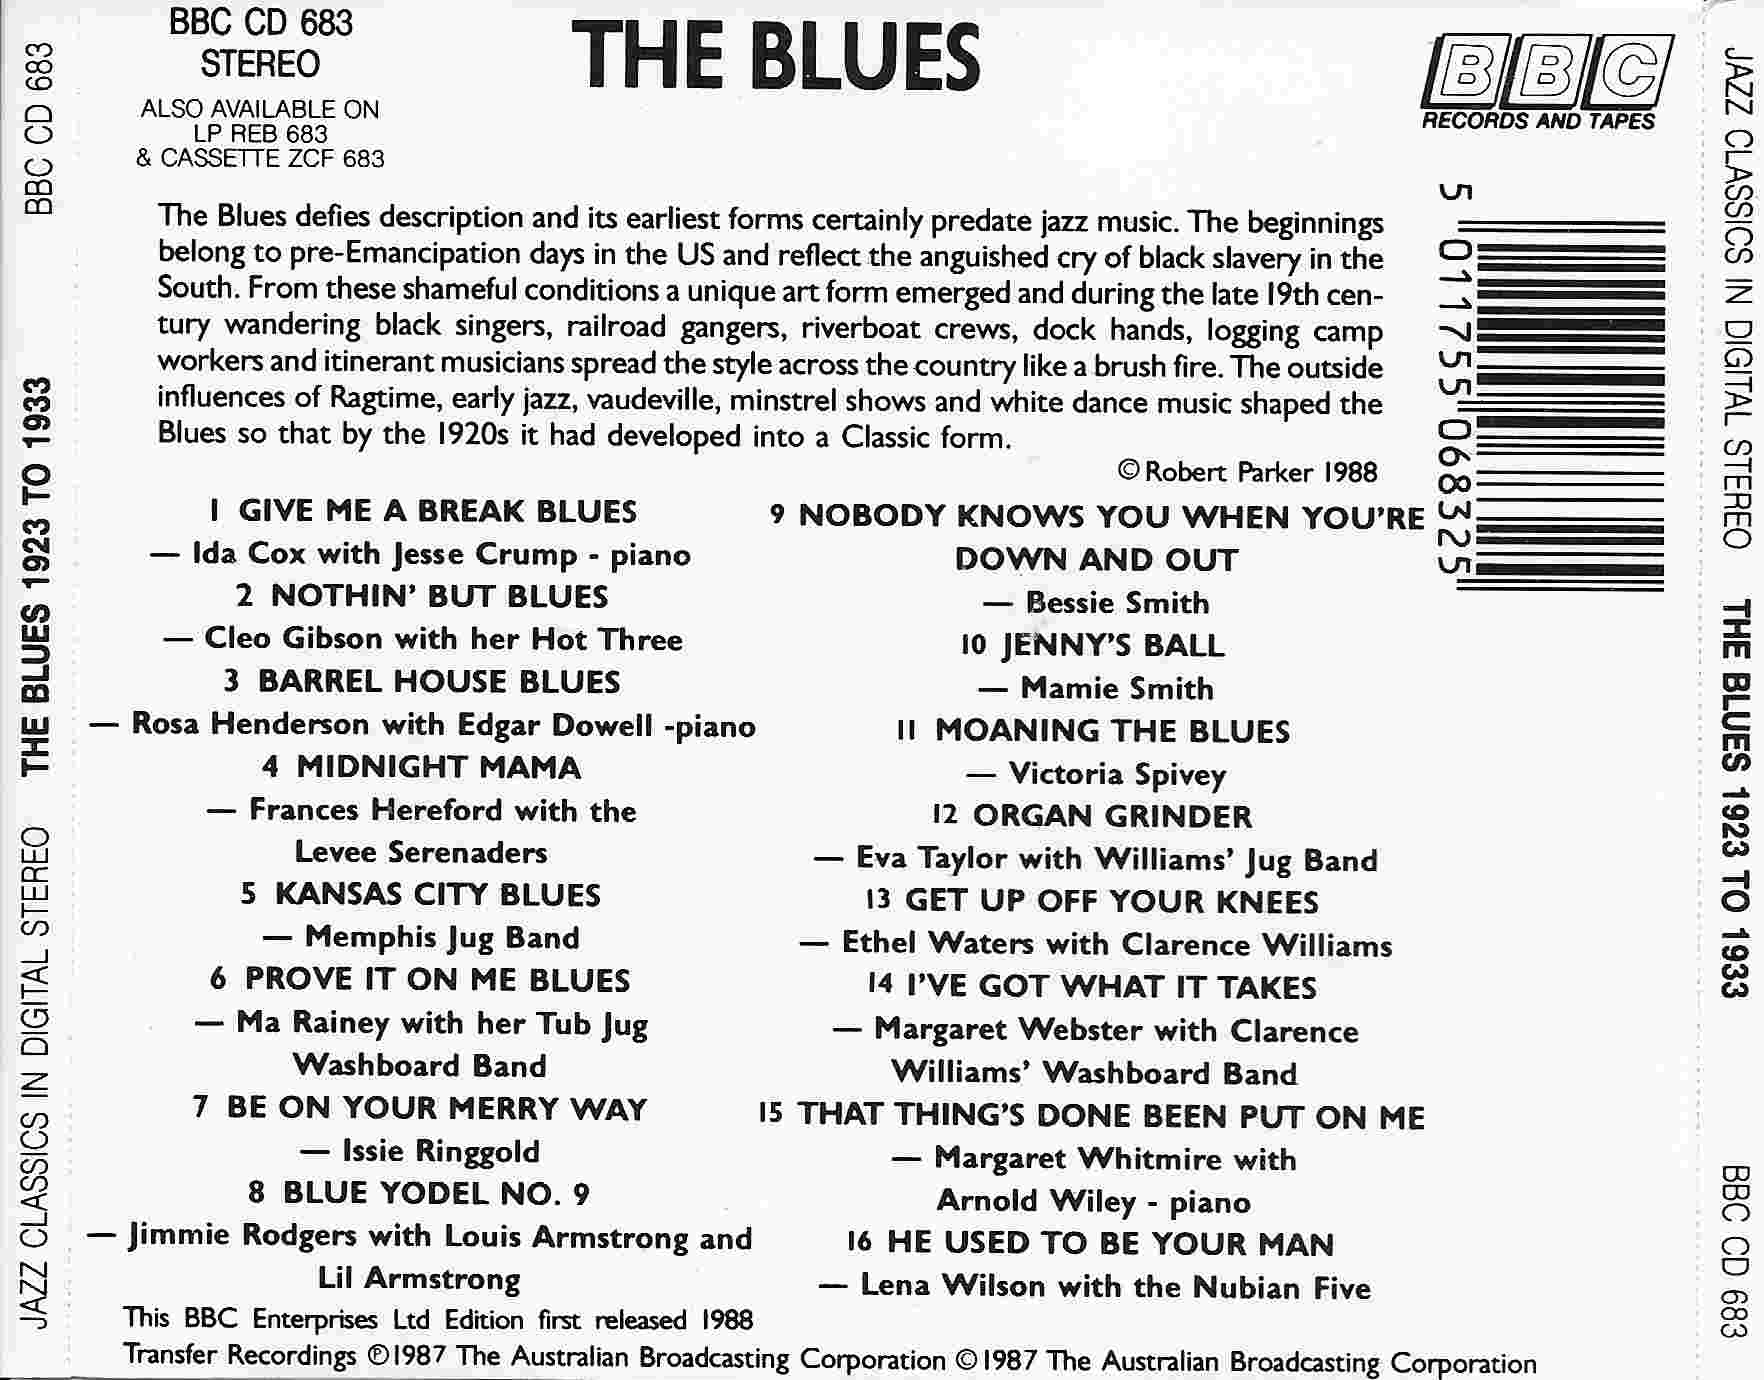 Picture of BBCCD683 Jazz classics - The blues 1923 - 1933 by artist Various from the BBC records and Tapes library